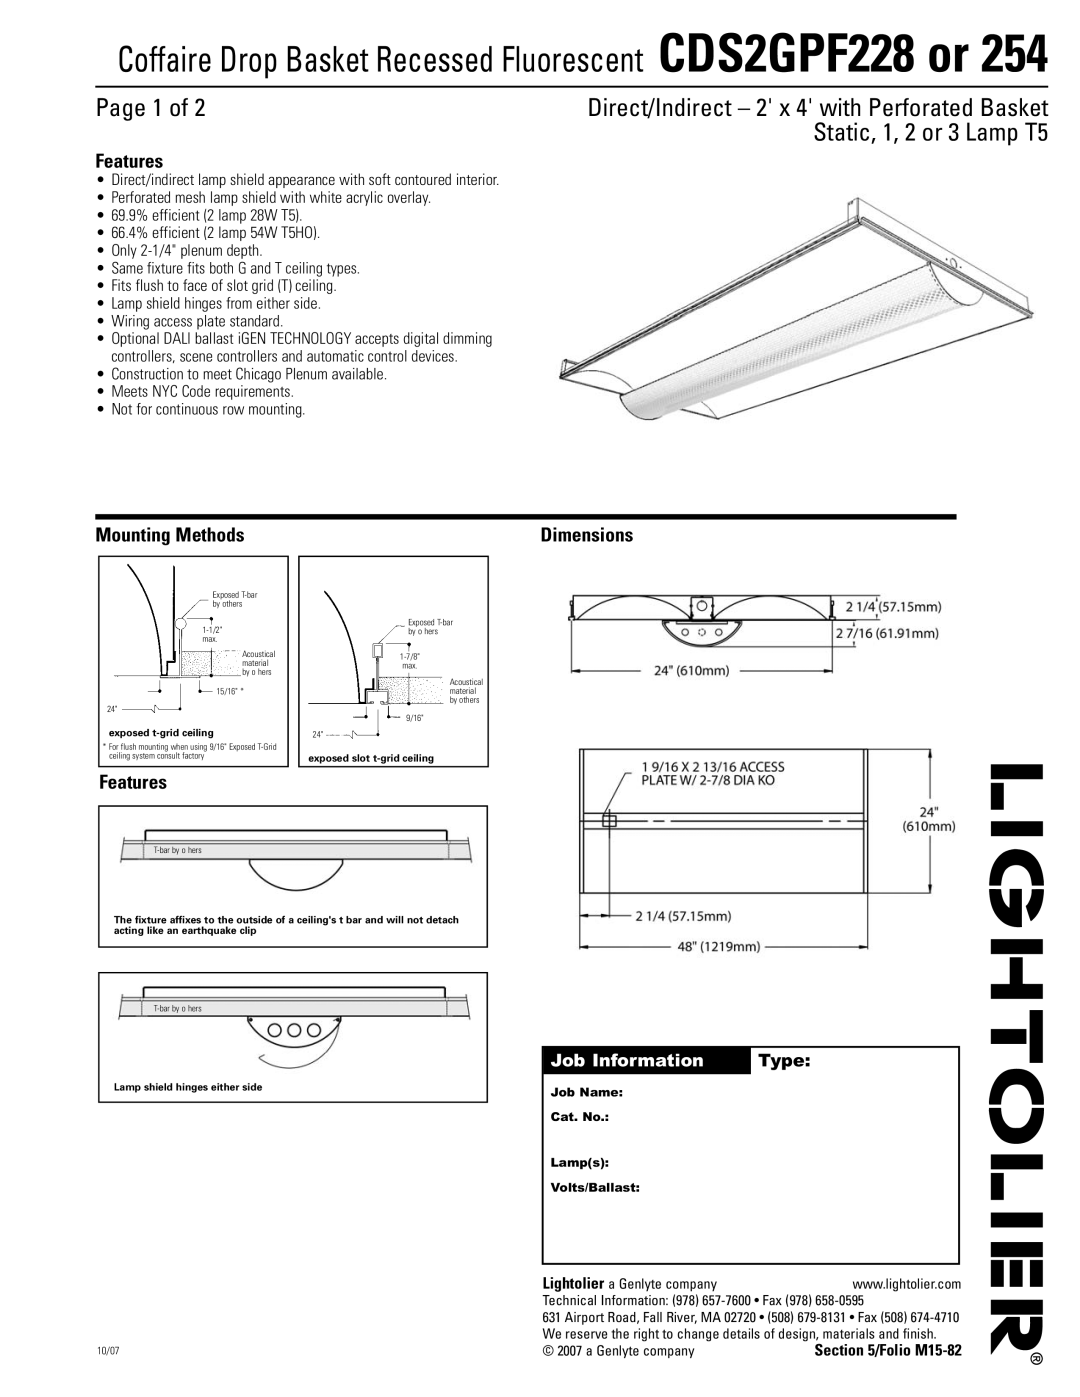 Lightolier CDS2GPF254, CDS2GPF228 dimensions Page 1 of, Features, Mounting Methods, Dimensions, Job Information, Type 